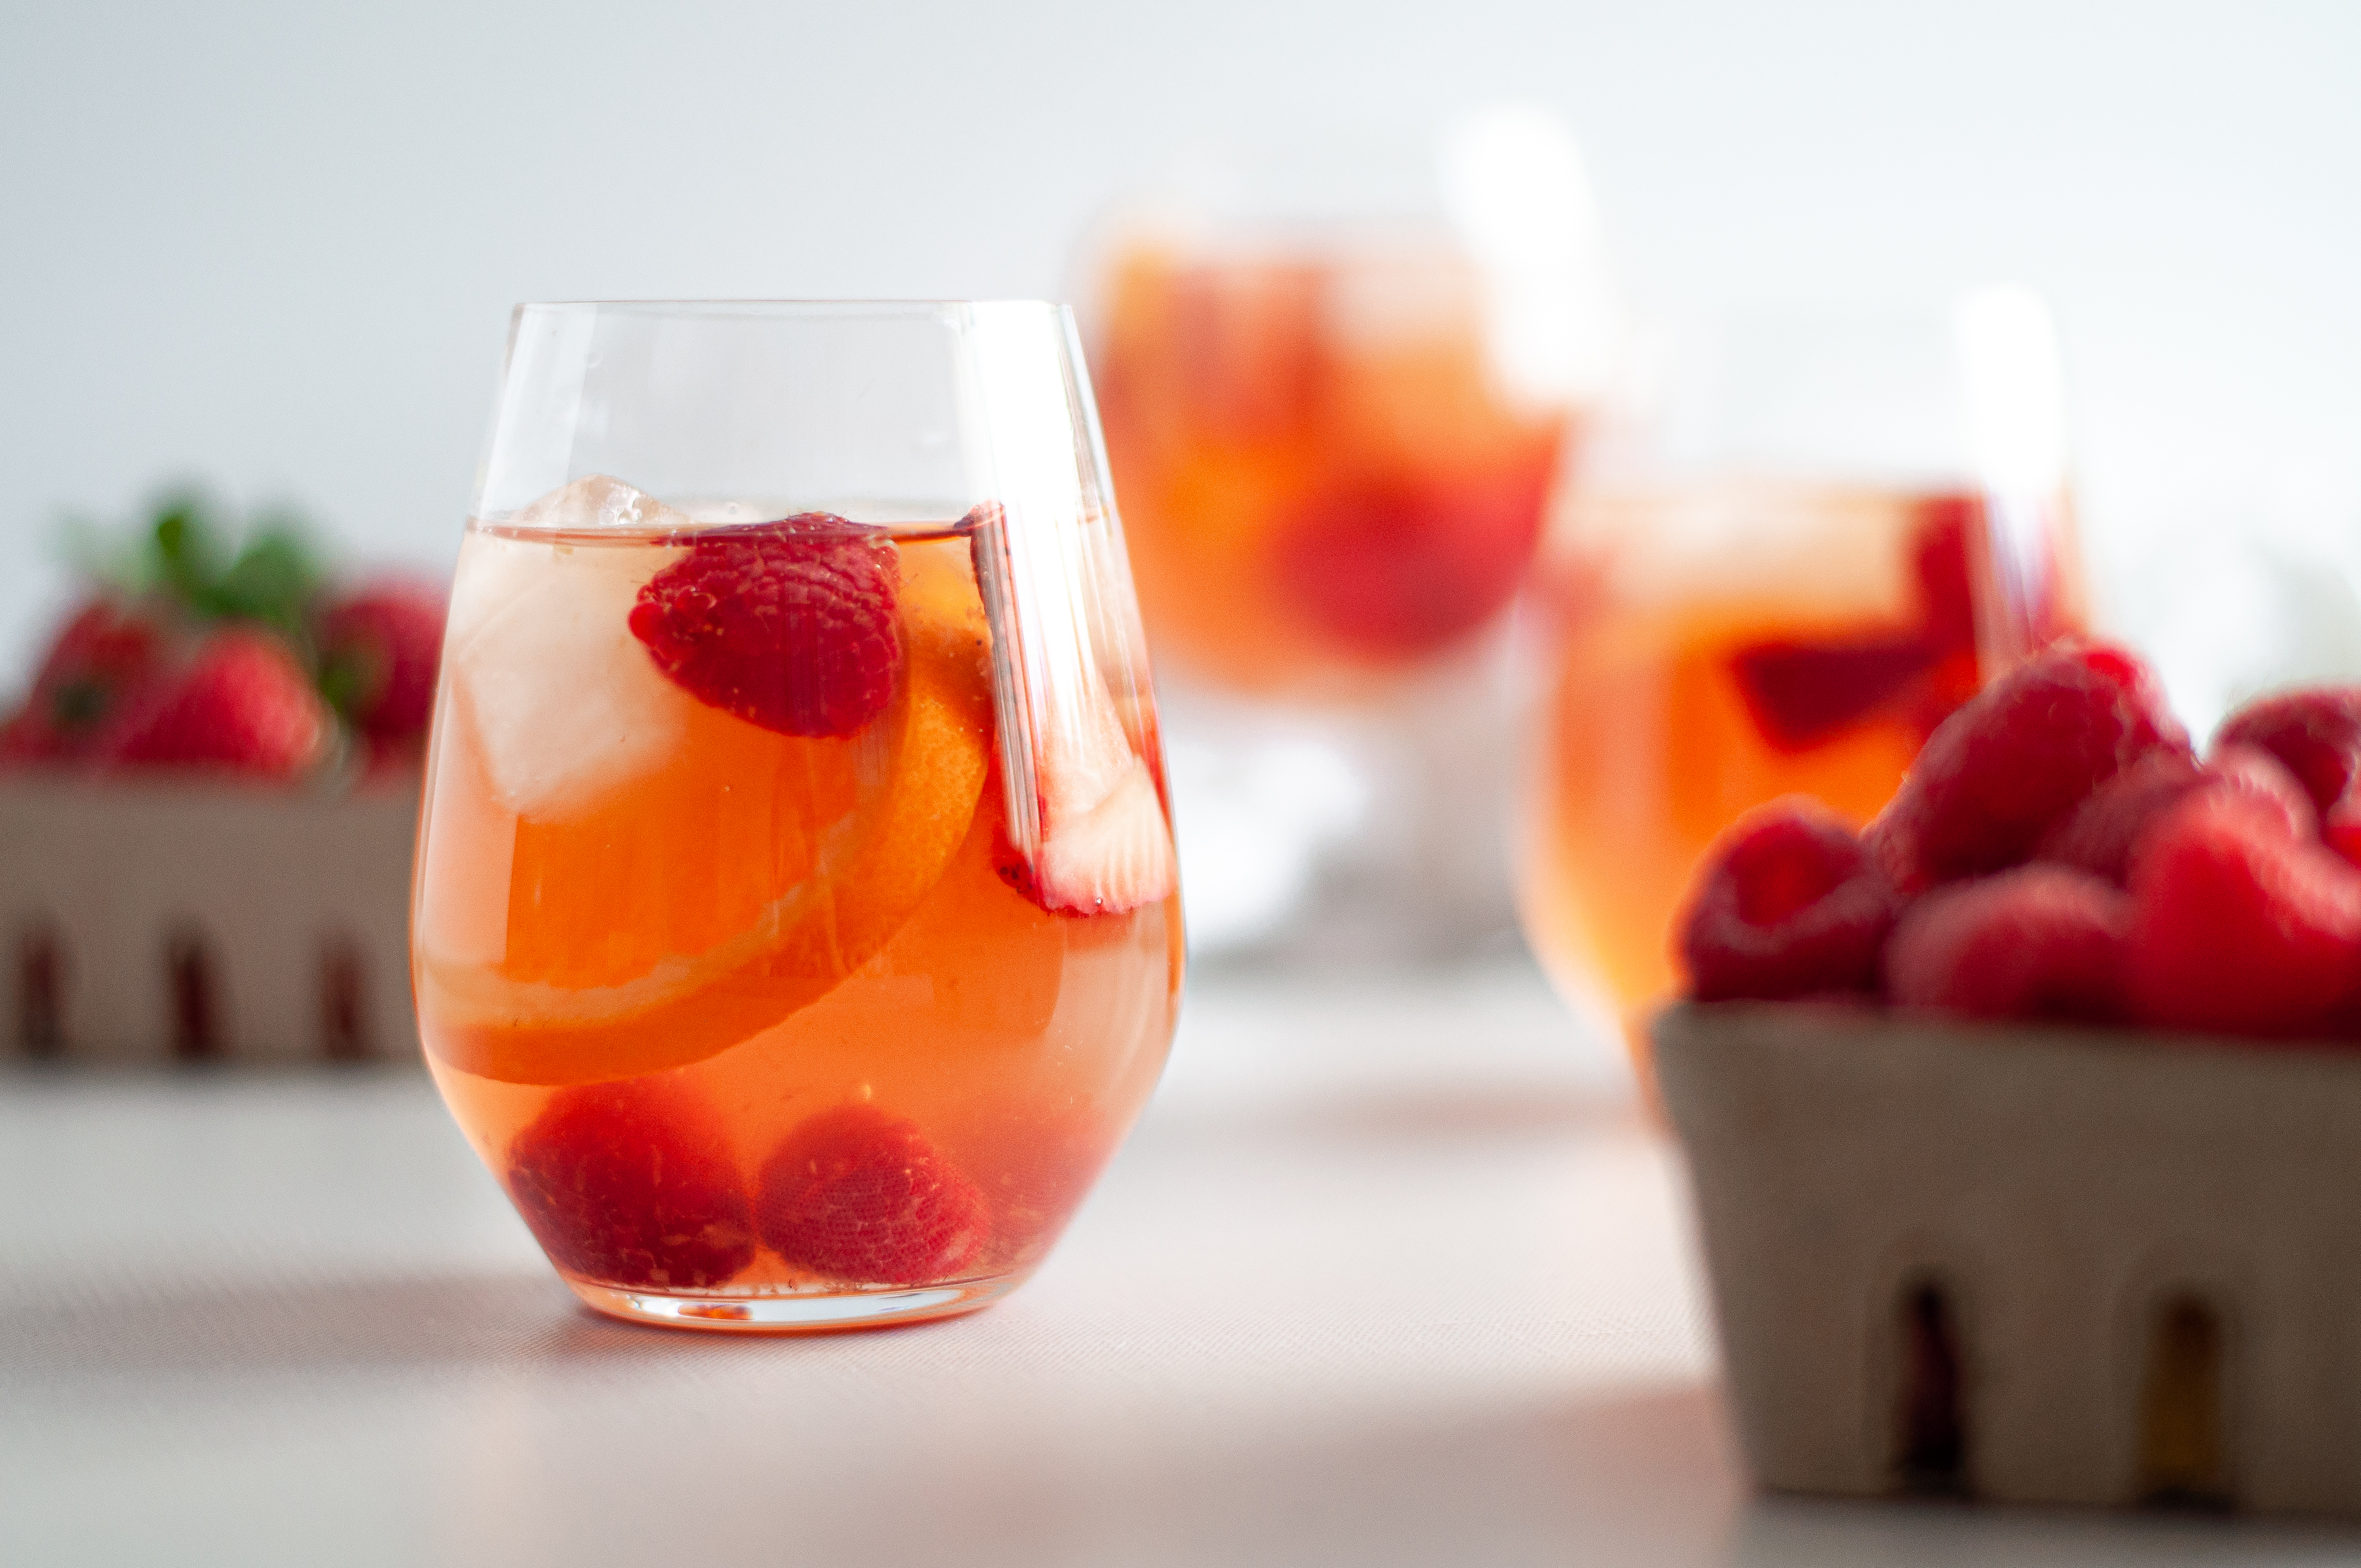 Straight on view of a stemless wine glass filled with rosé sangria, berries, orange slices, and ice. Surrounded by containers of berries and additional glasses filled with this rosé sangria recipe.